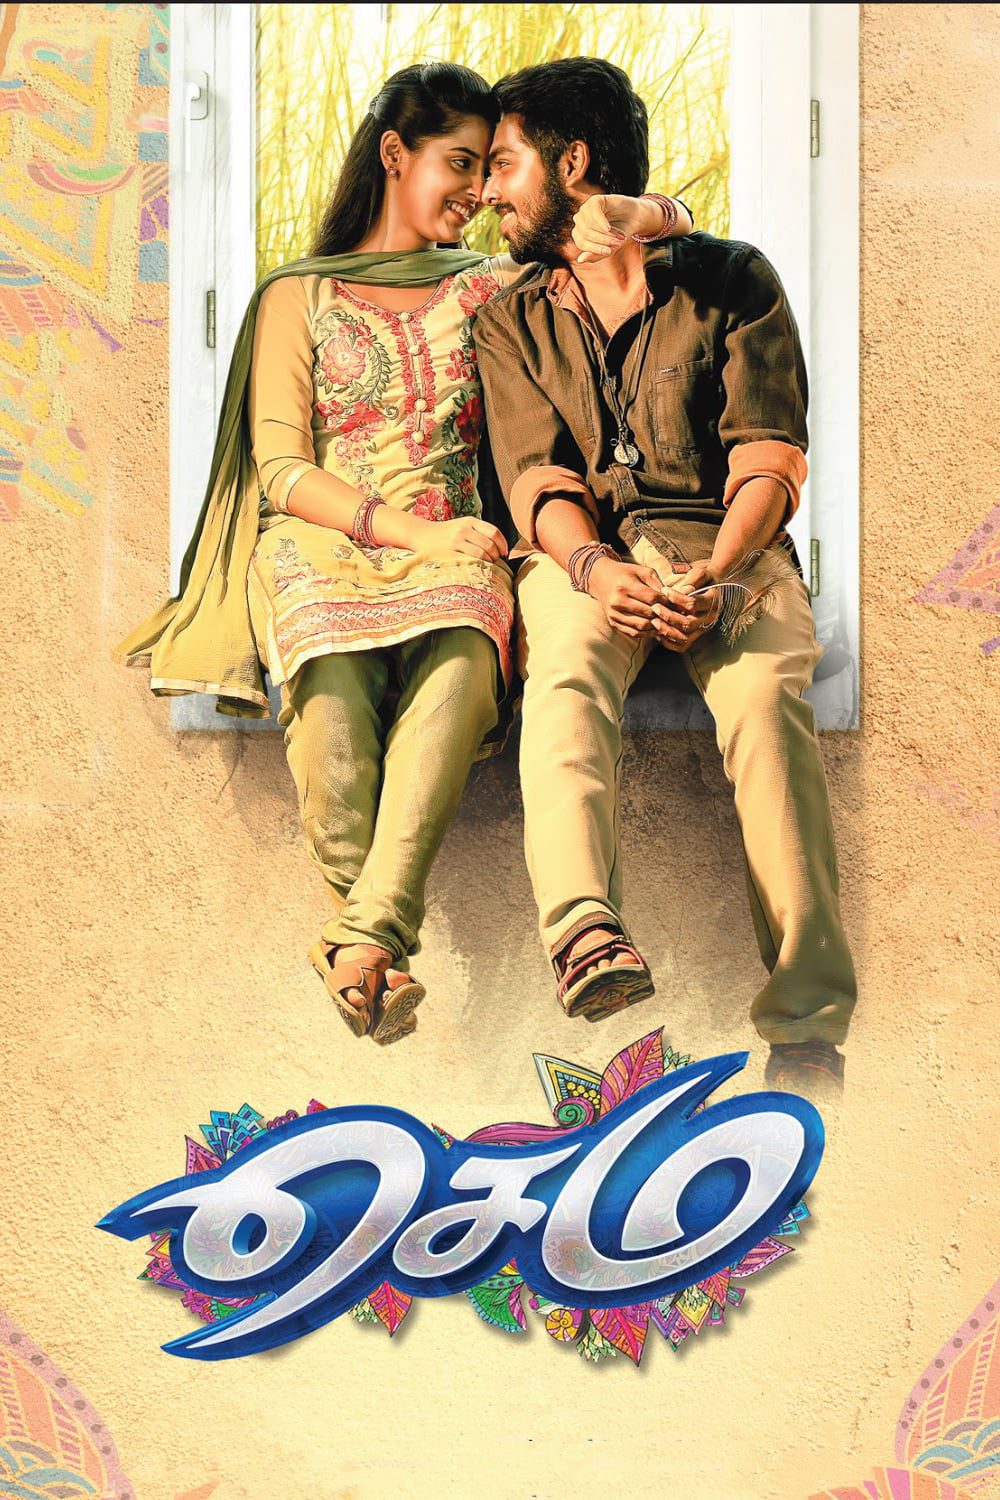 Poster for the movie "Sema"